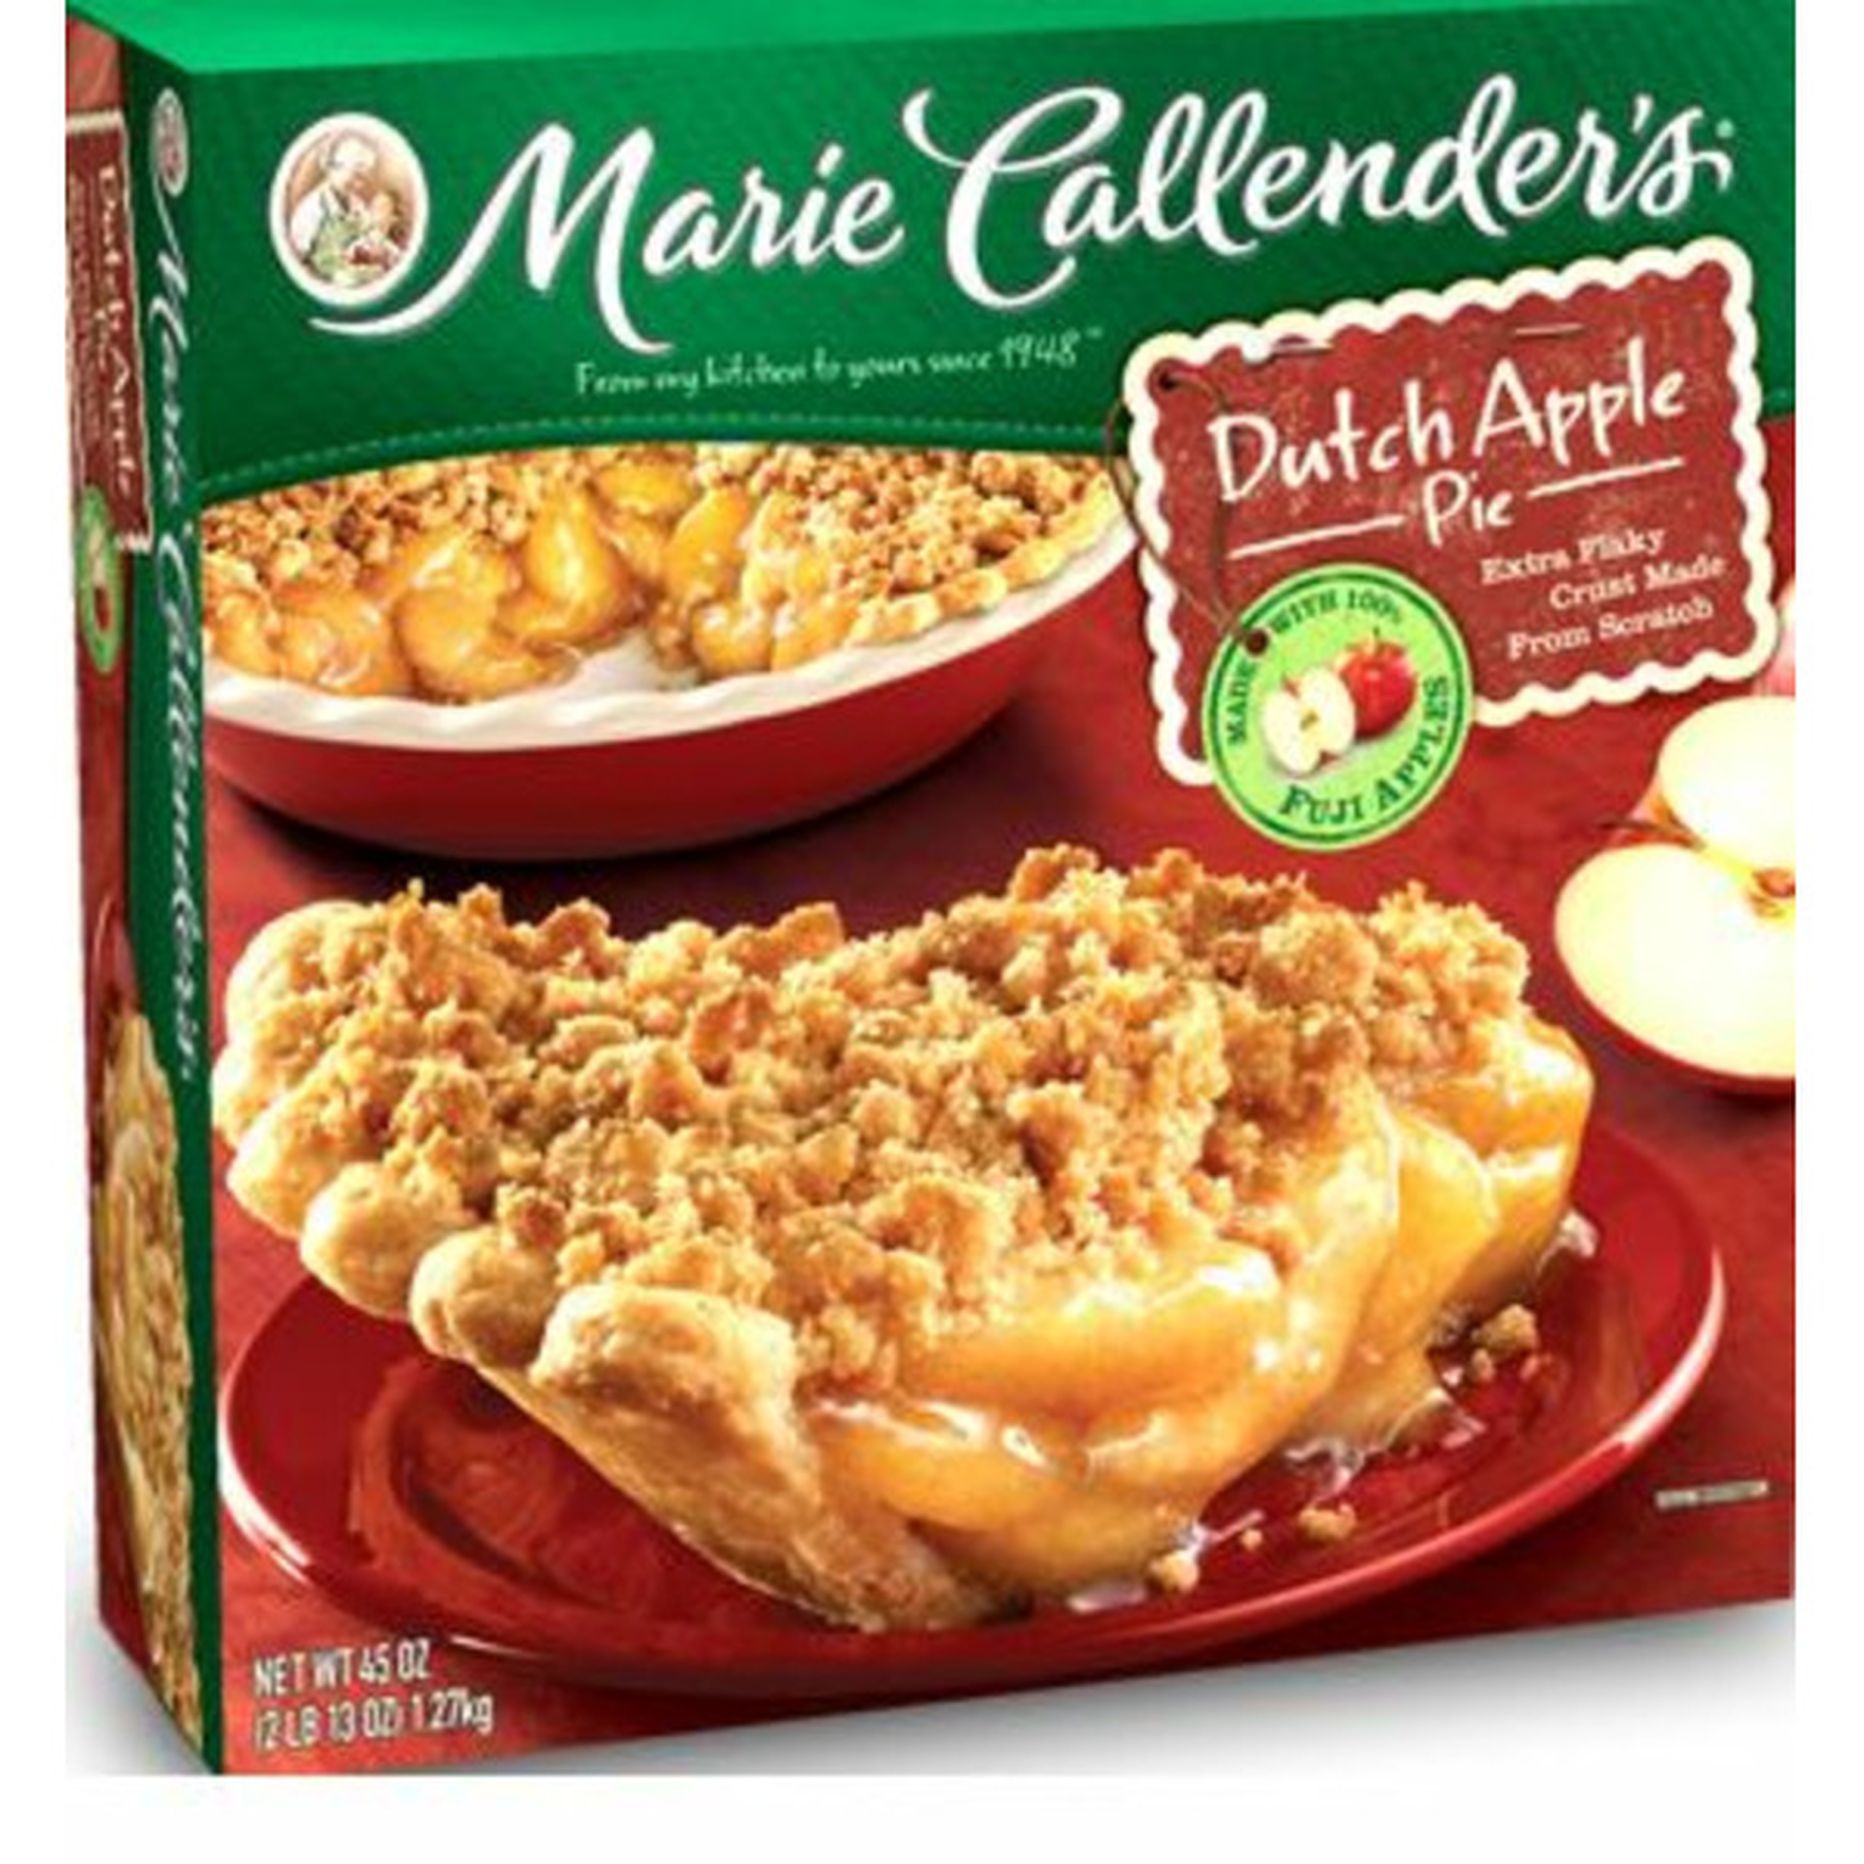 Marie Callender's Dutch Apple Pie (45 oz) Delivery or Pickup Near Me